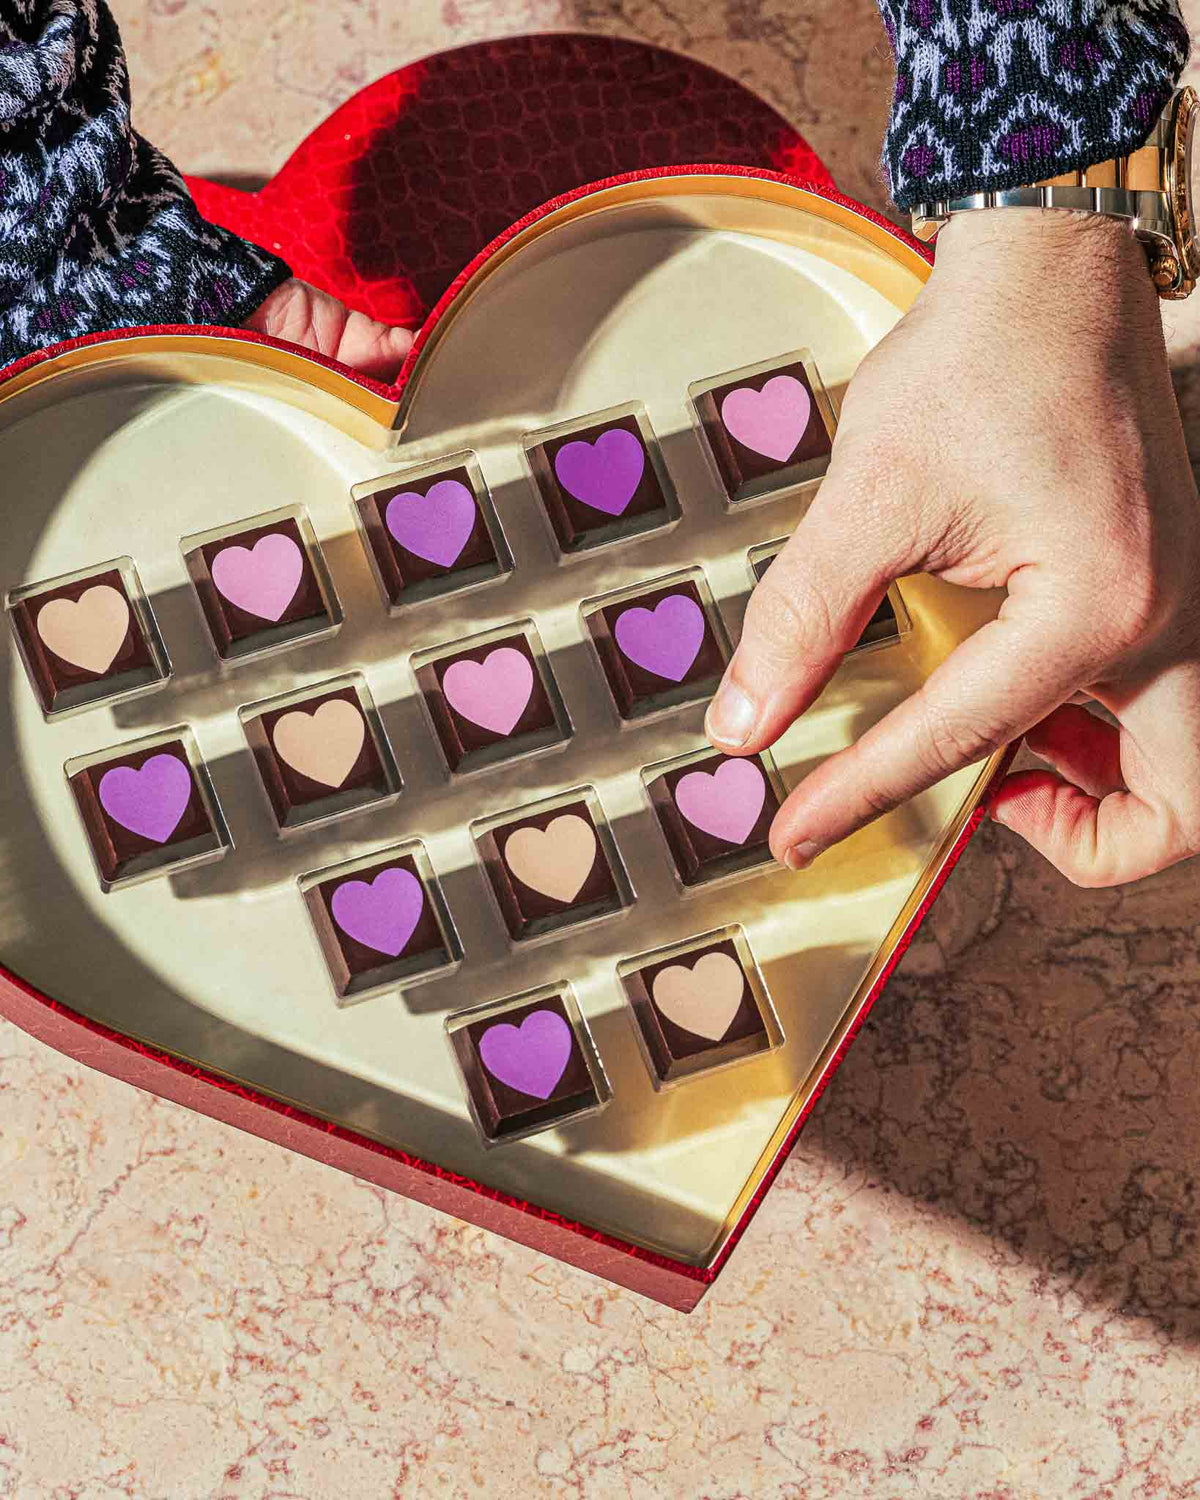 Vegan Valentine's Chocolate box with heart chocolate truffles and a hand picking one up